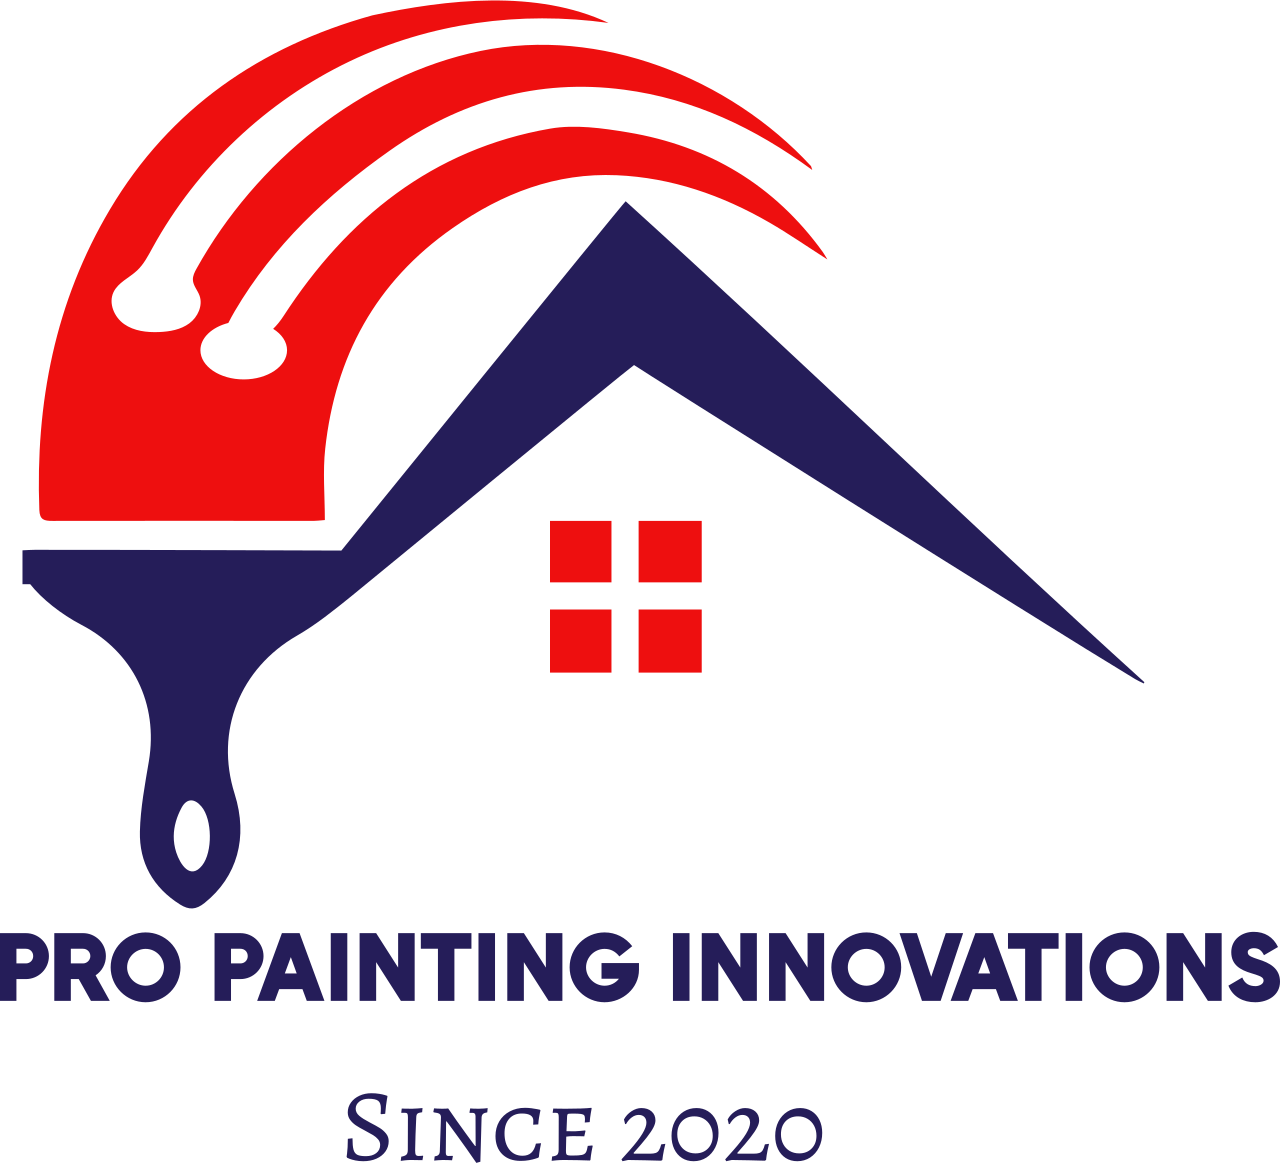 ProPainting's web page